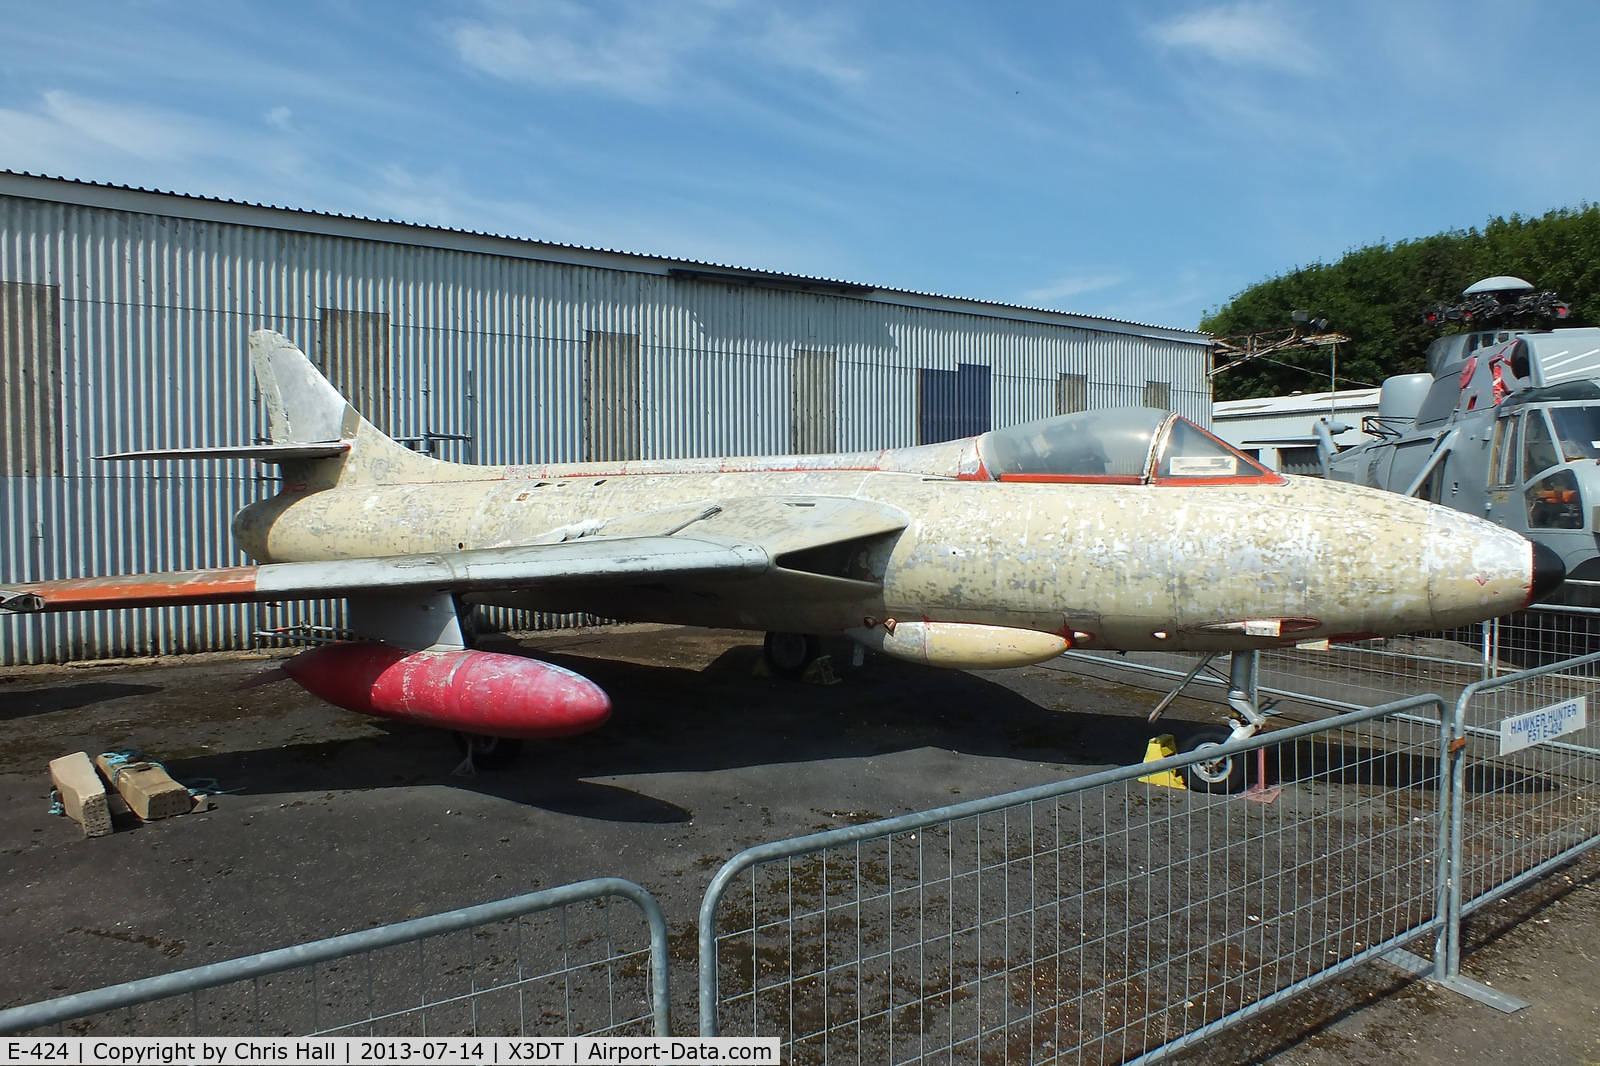 E-424, Hawker Hunter F.51 C/N 41H-680283, preserved at the South Yorkshire Aircraft Museum, AeroVenture, Doncaster